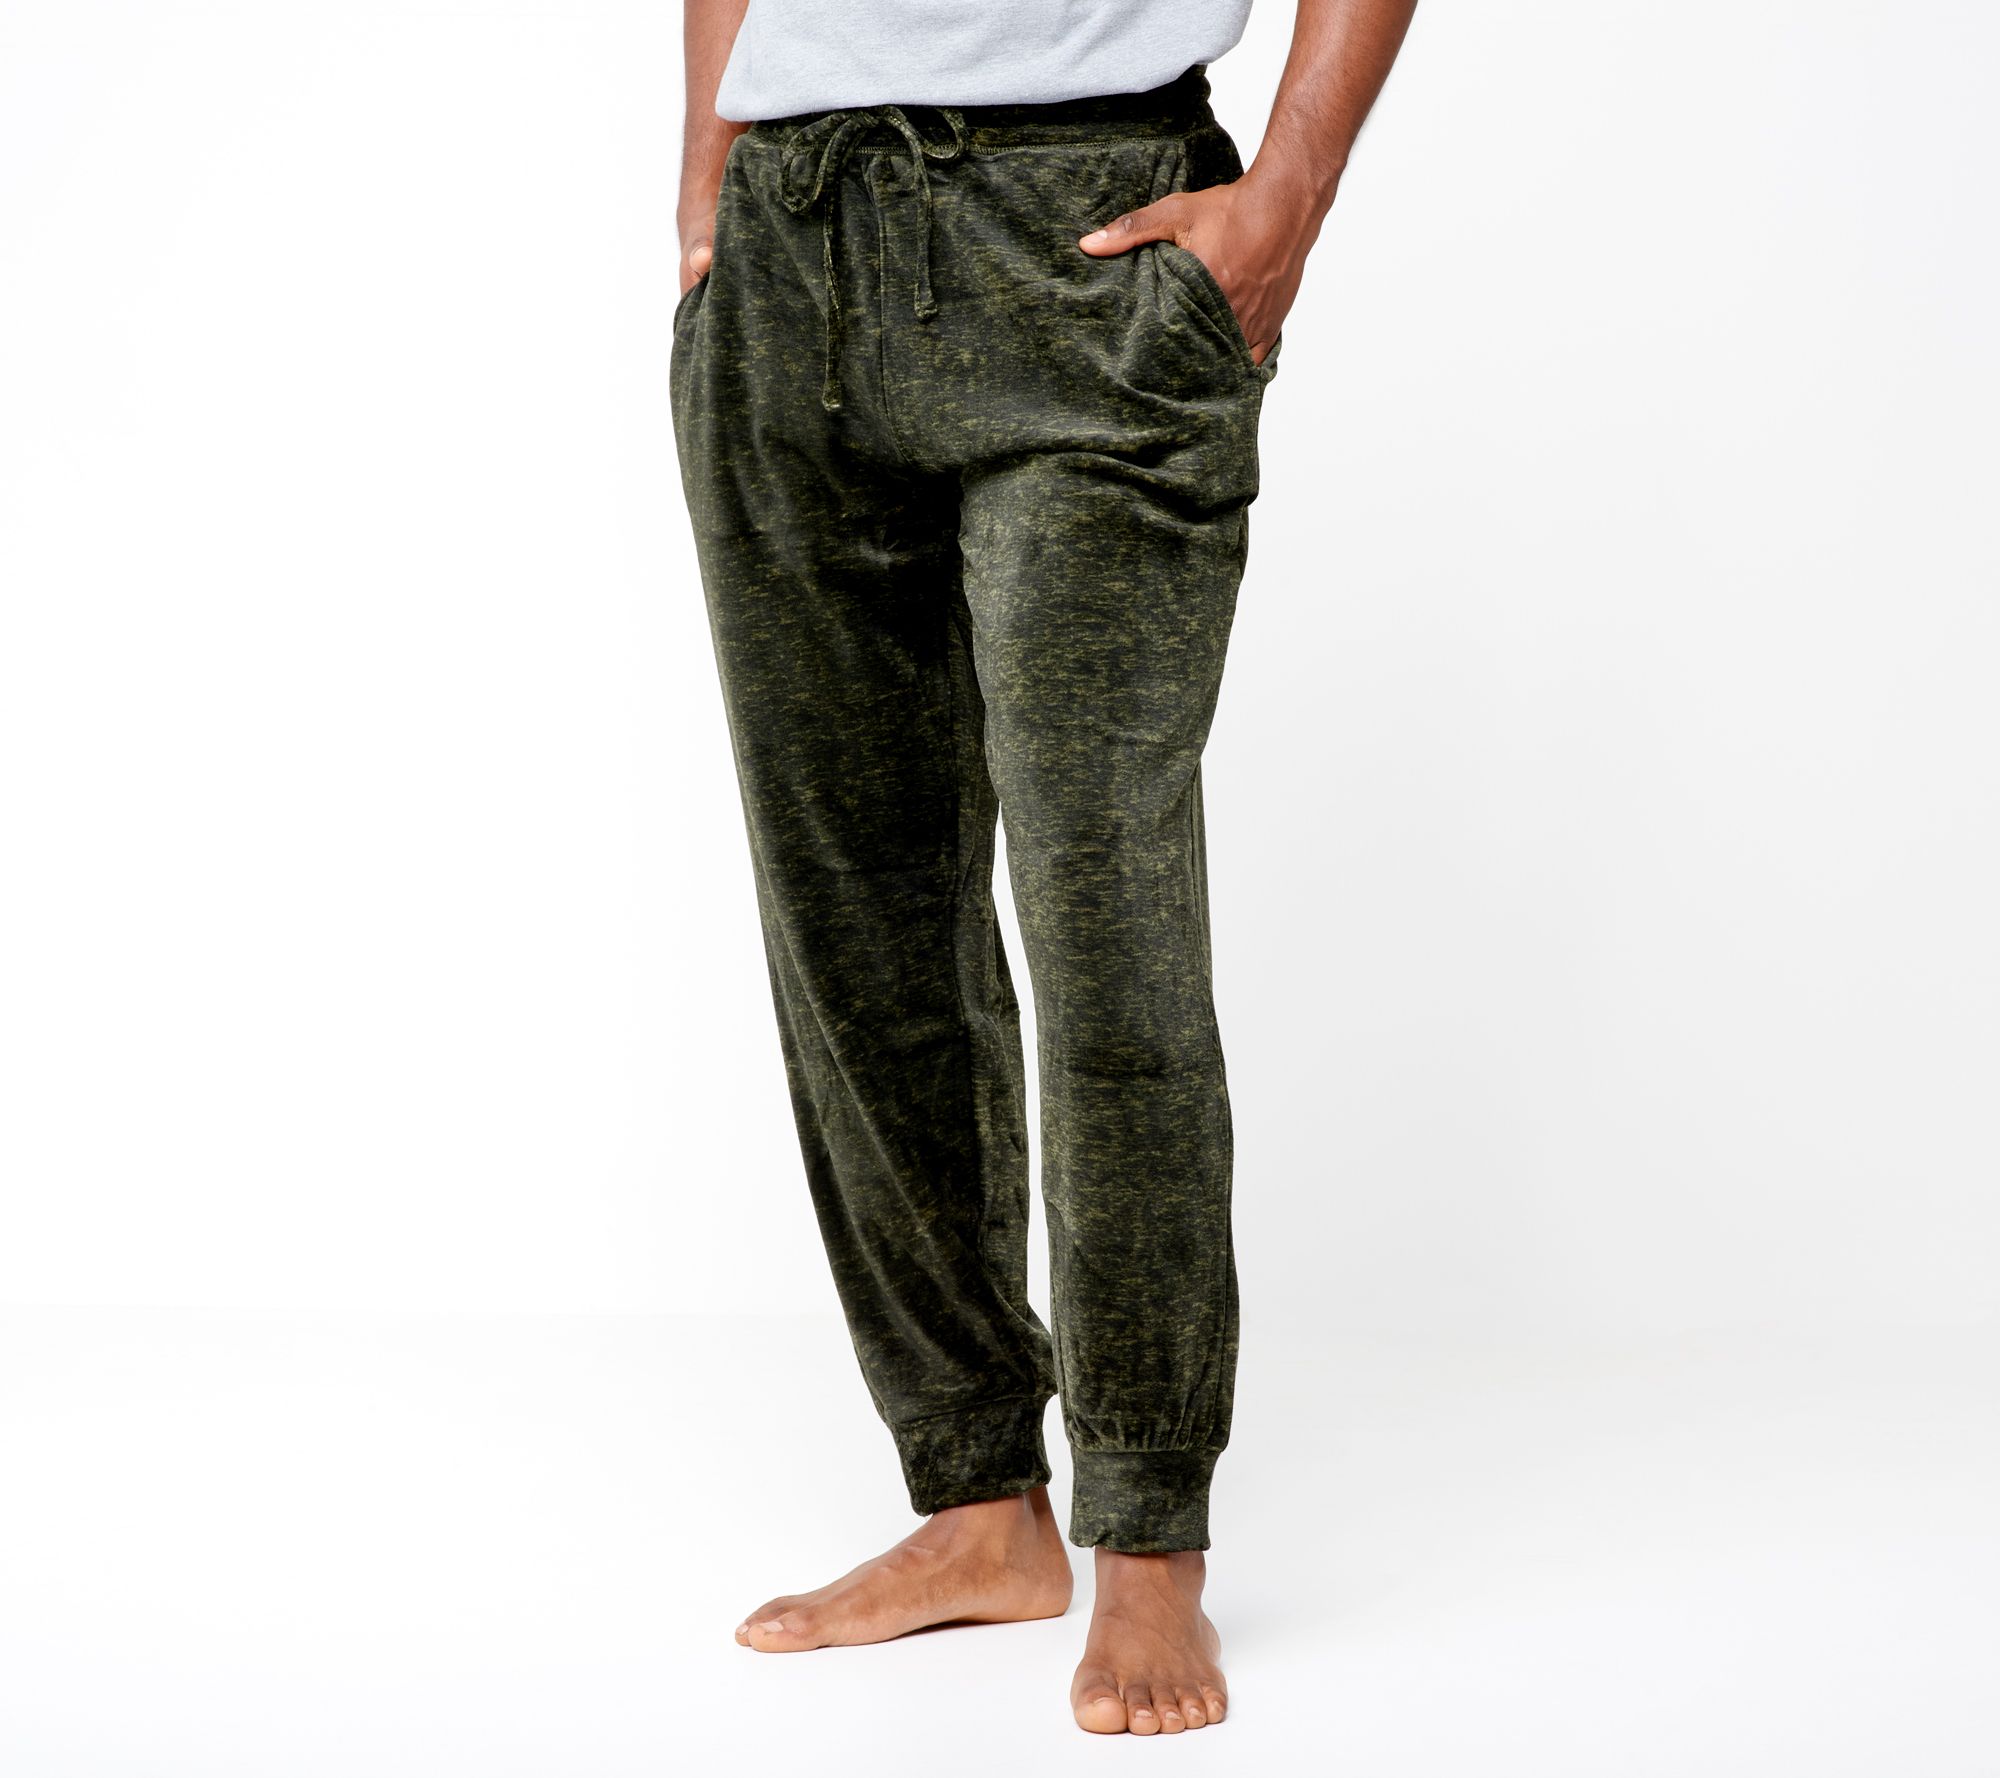 Clothing & Shoes - Bottoms - Pants - Cuddl Duds Fleece Lounge Pant - Online  Shopping for Canadians